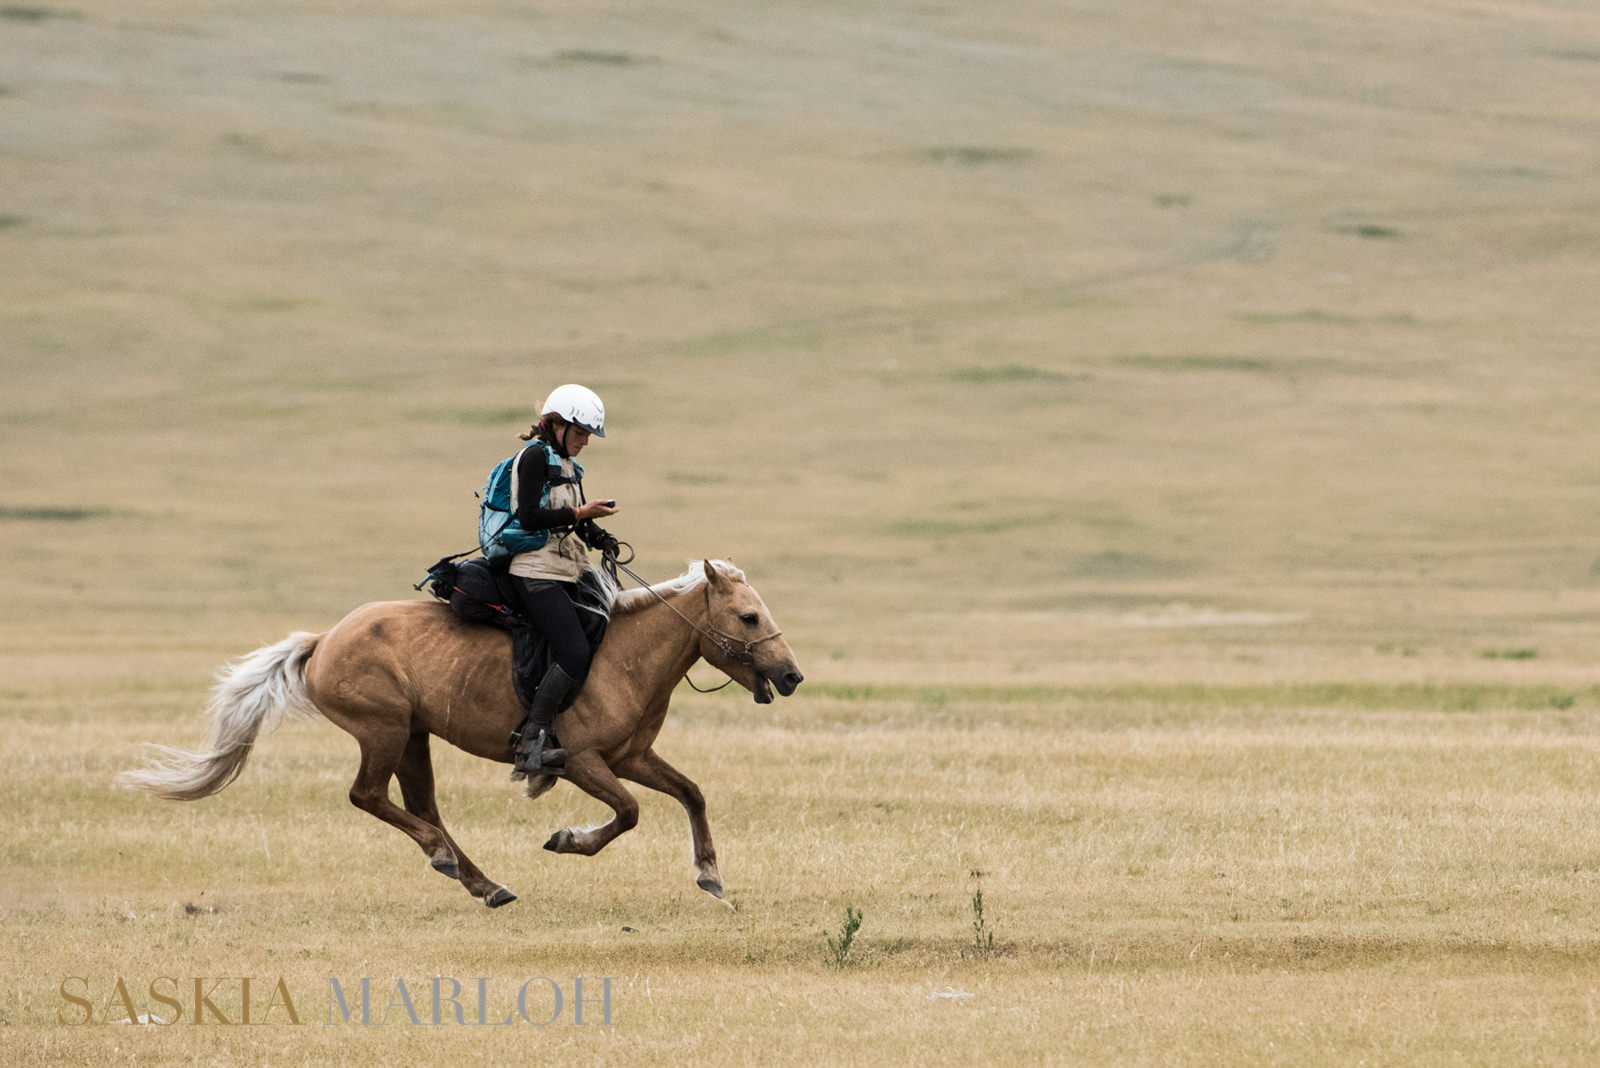 2015-08-11-Day 7 Mongol-Derby-Urtuu-23-28- 18 year old Elise from France heading for the finishing line to become 2nd place at the 2015 Mongol Derby